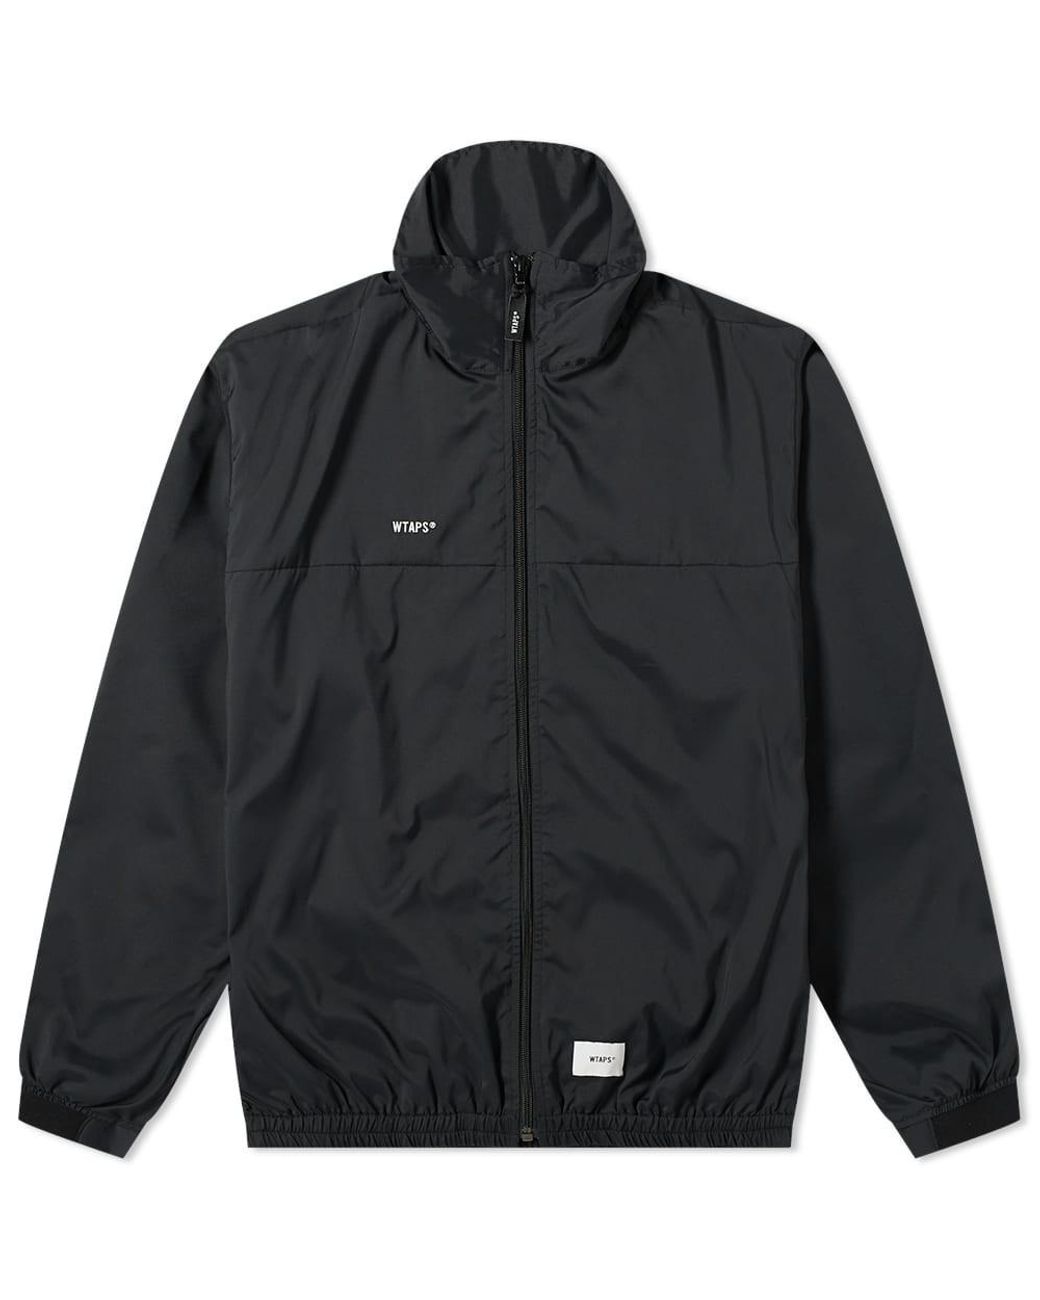 WTAPS Synthetic Academy Jacket in Black for Men - Lyst